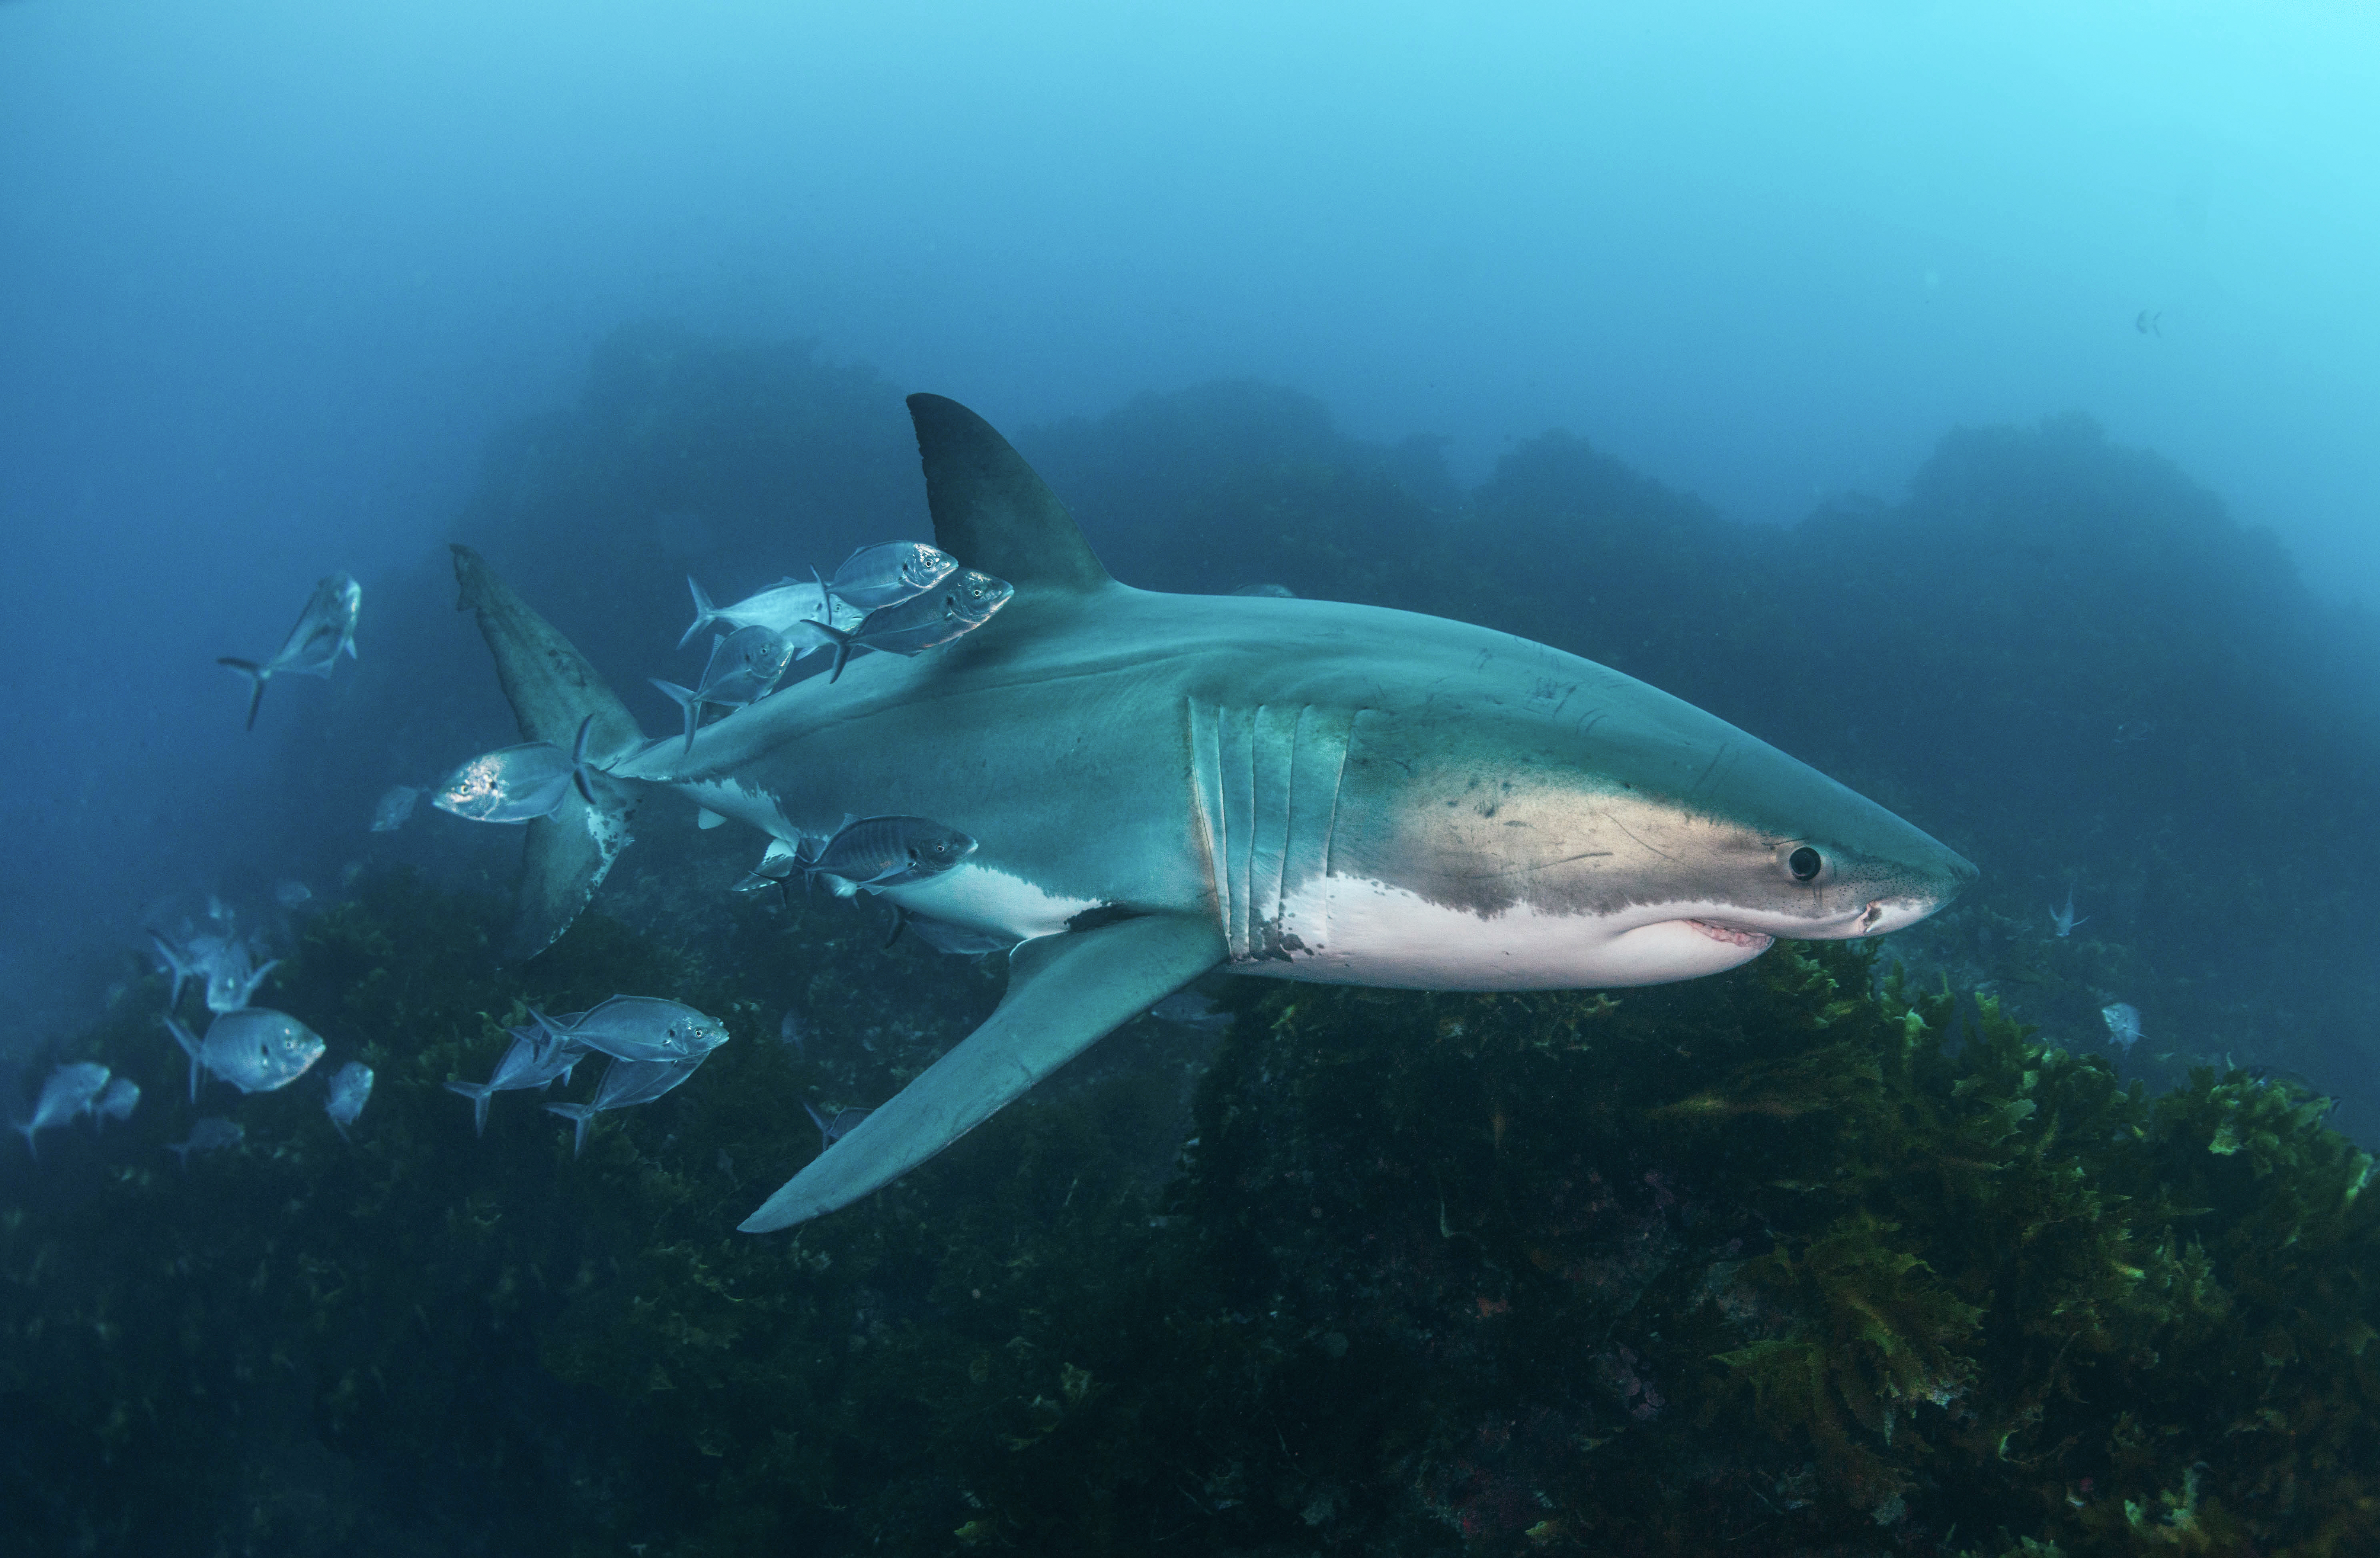 View of great white shark from the Rodney Fox’s ocean-floor cage. Photo by Andrew Fox